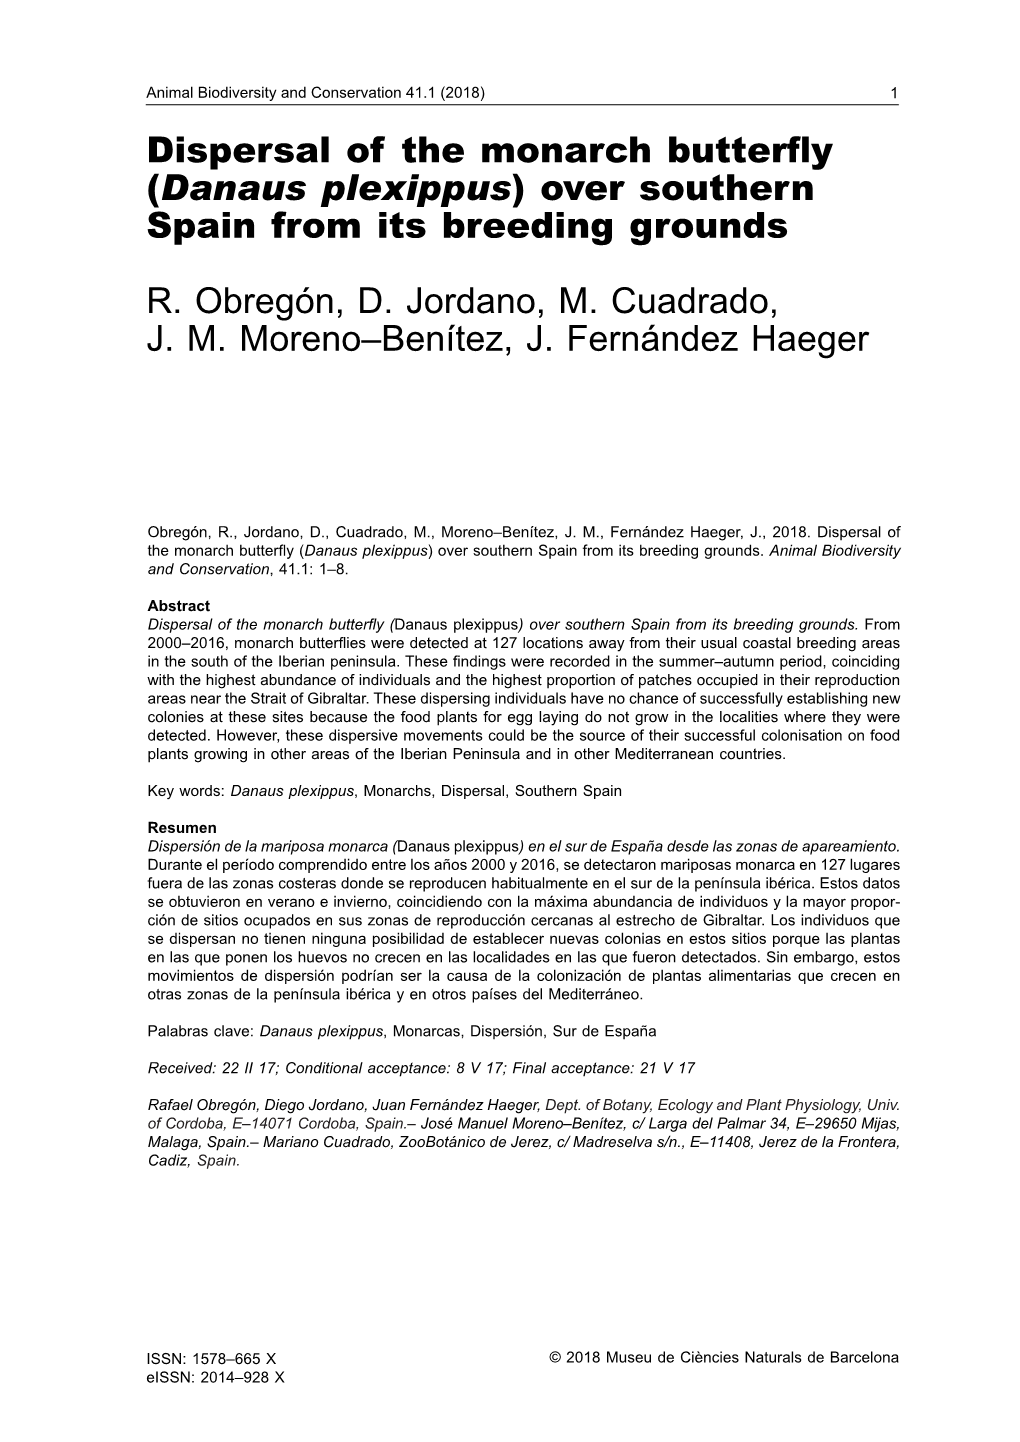 Dispersal of the Monarch Butterfly (Danaus Plexippus) Over Southern Spain from Its Breeding Grounds